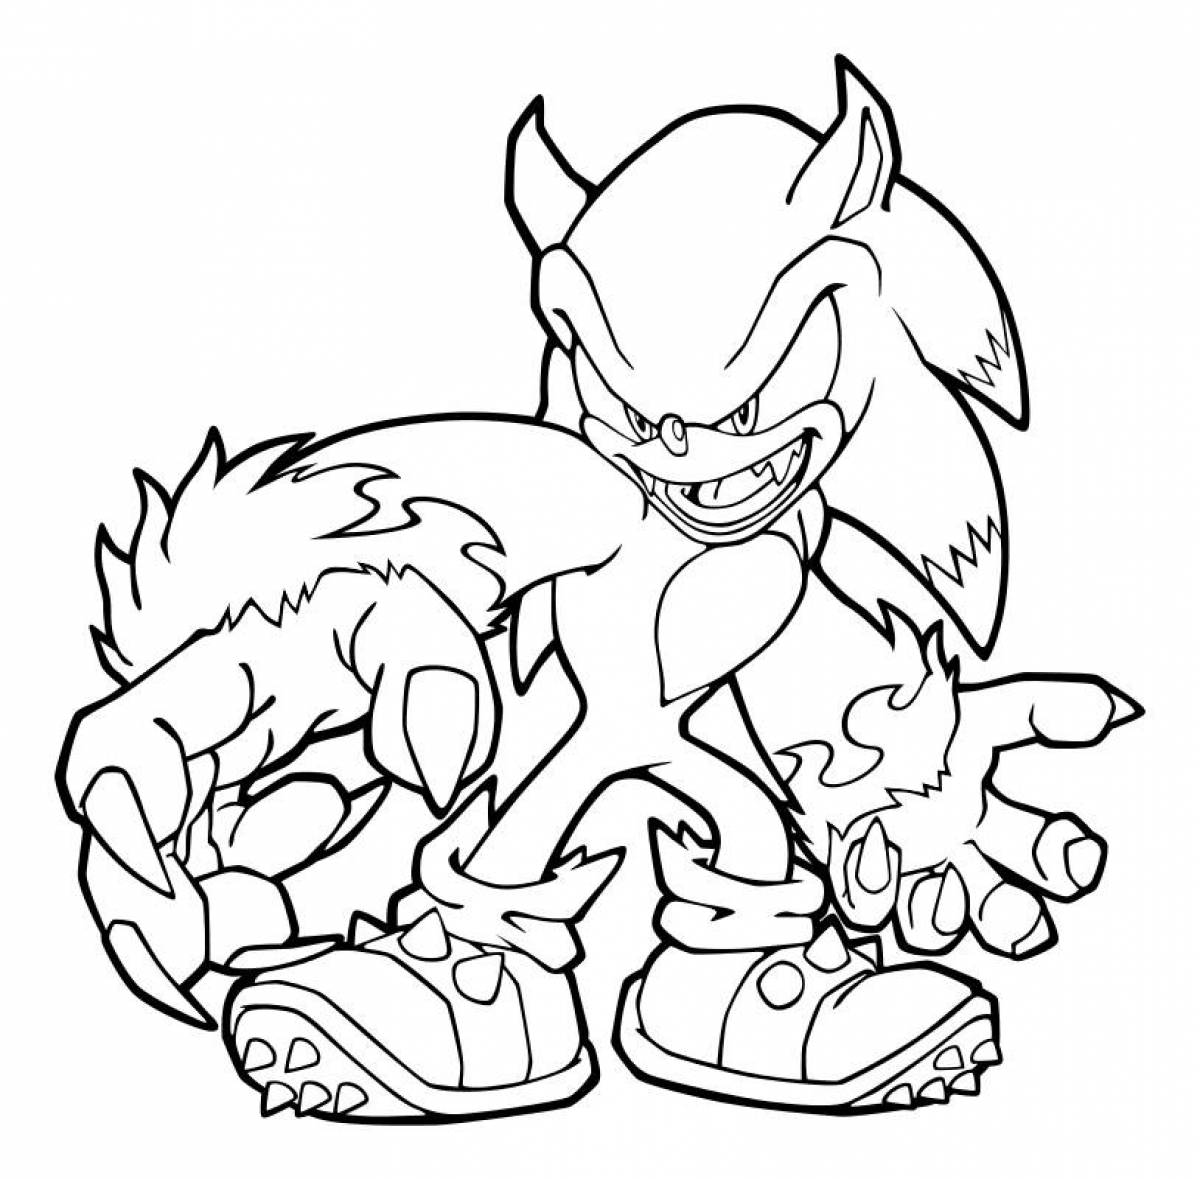 Impressive sonic exe coloring book